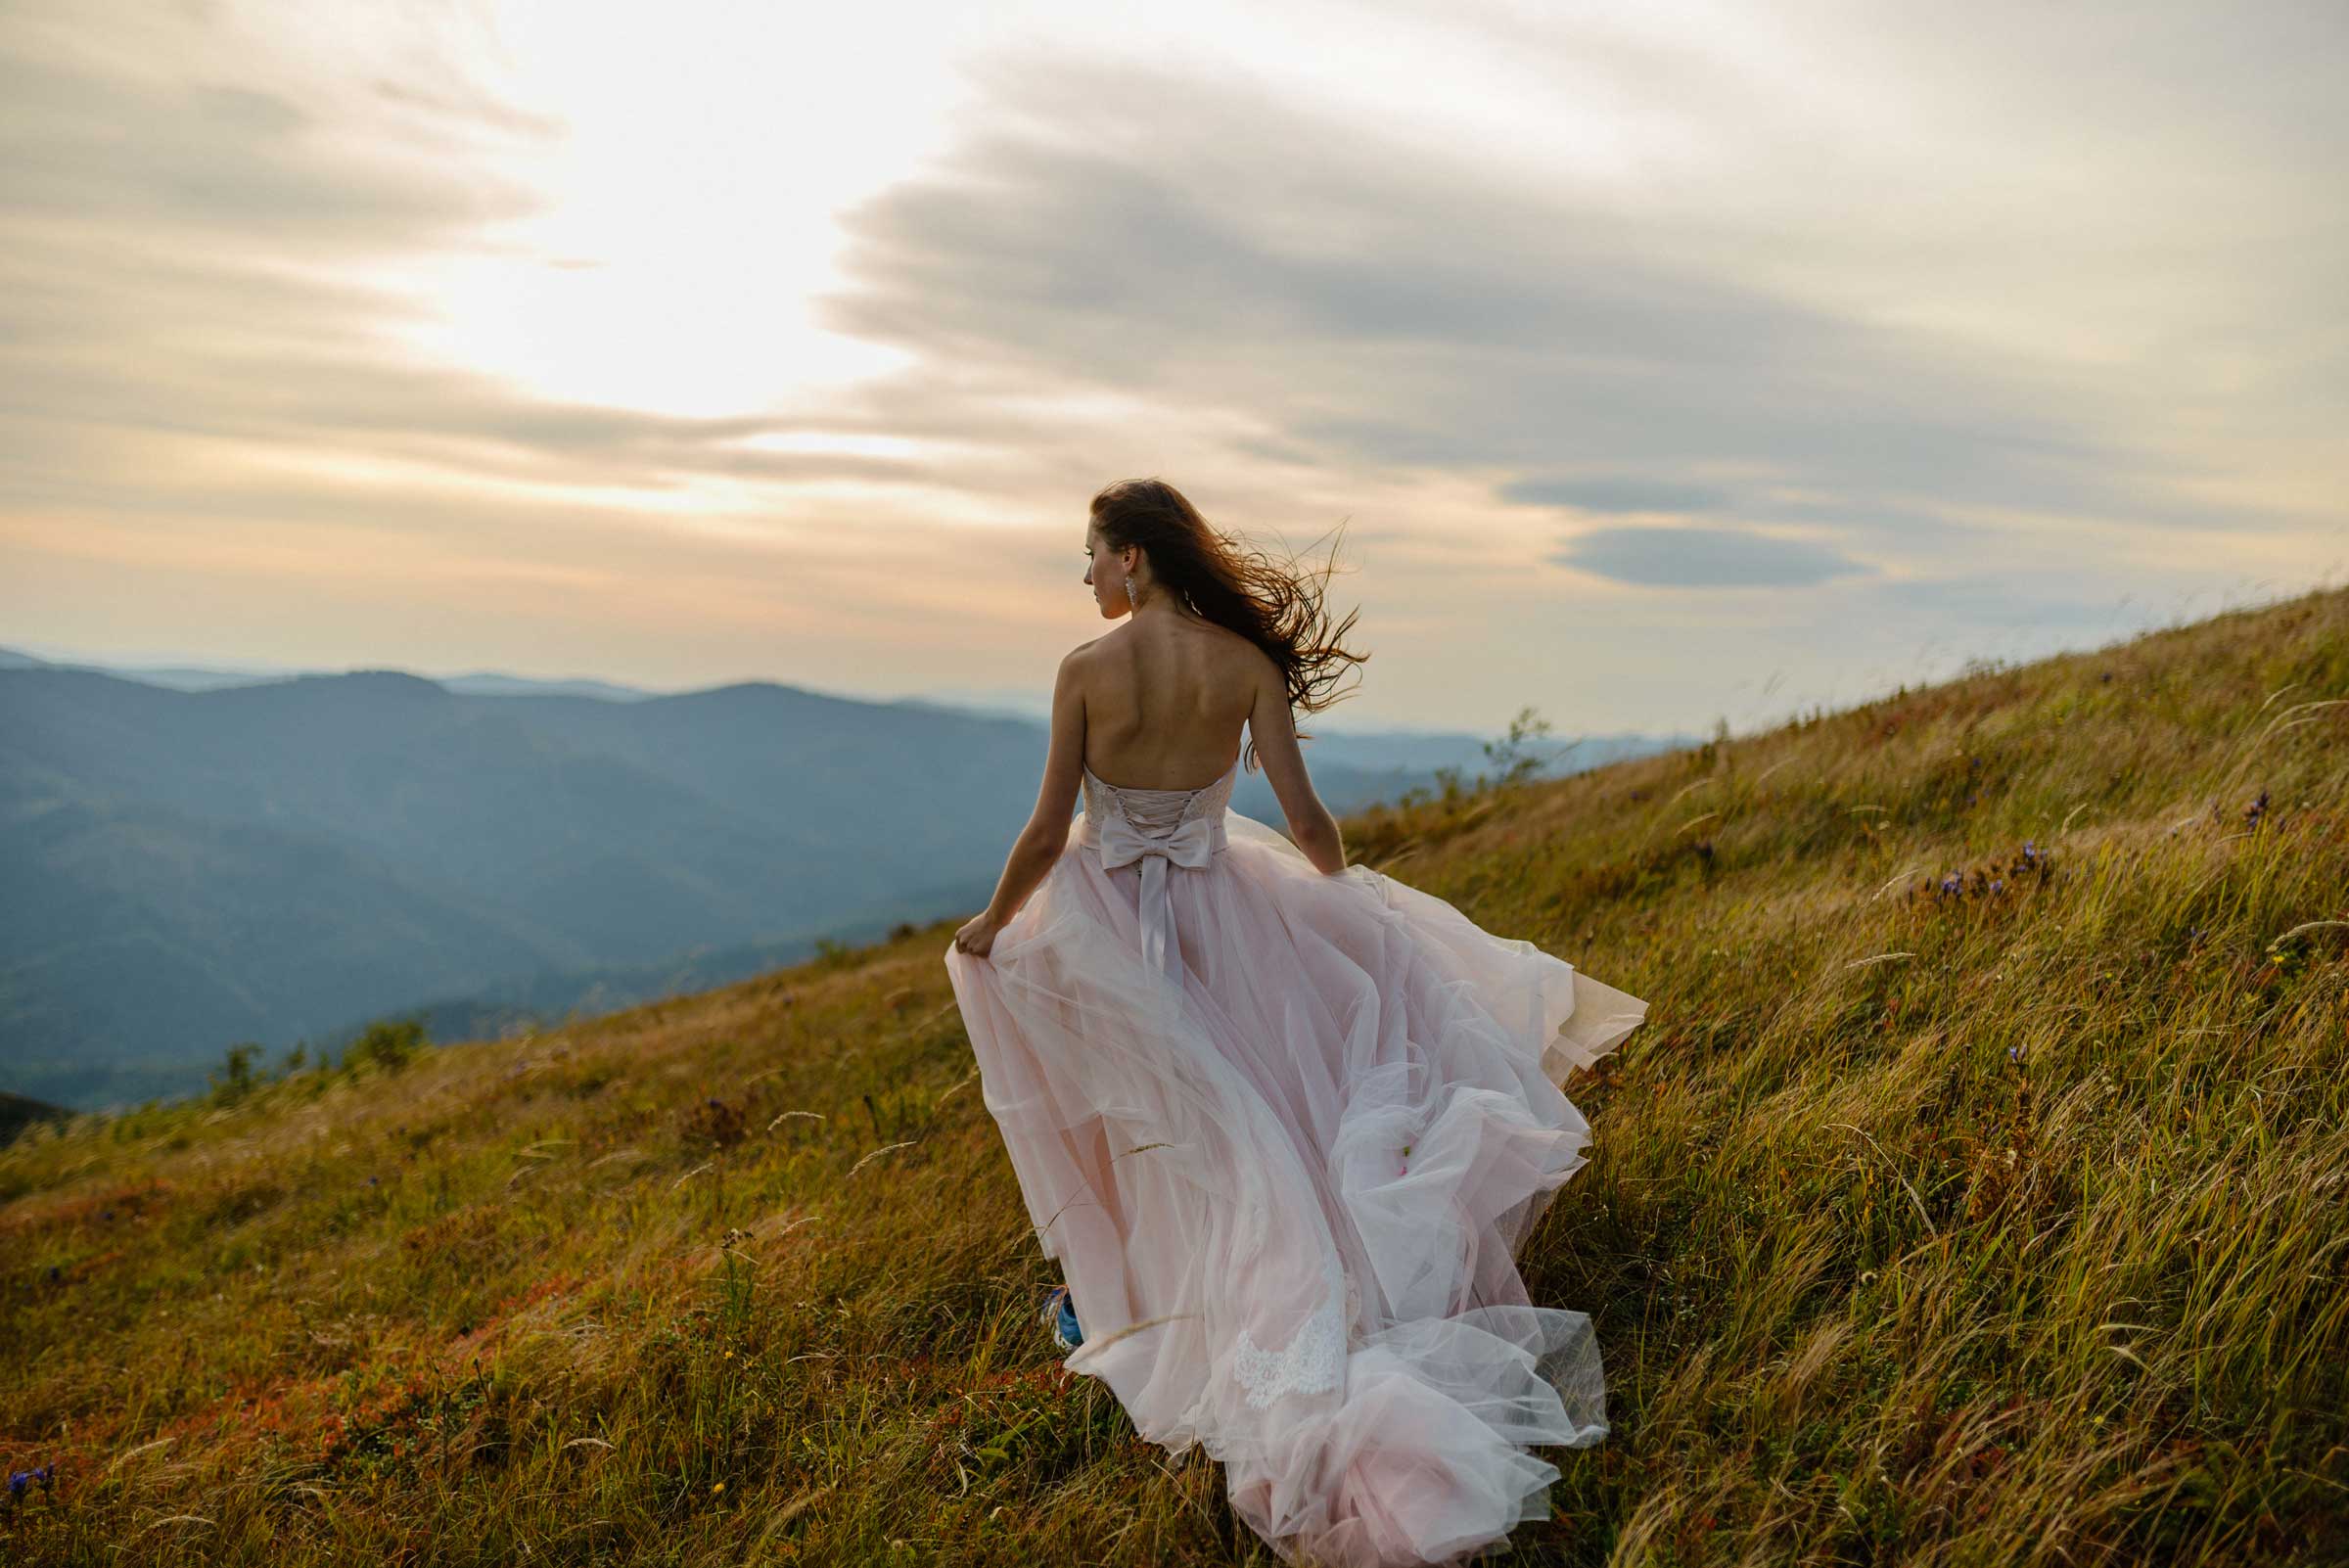 bride-in-the-mountains-the-concept-of-lifestyle-a-2021-09-01-11-28-54-utc.jpg